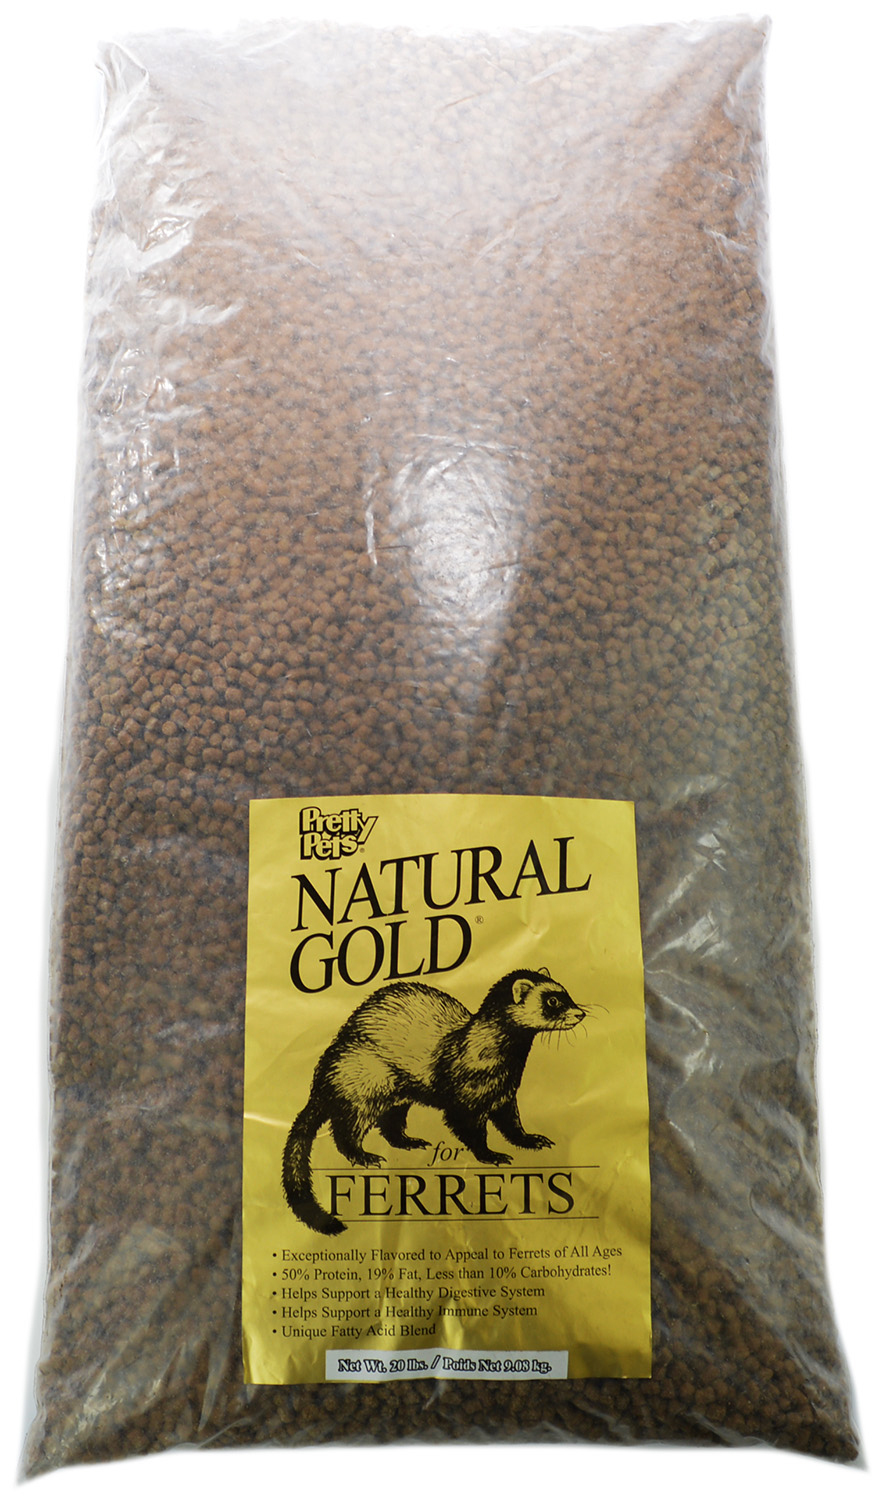 20 lb Pretty Pets Natural Gold Ferret Food Daily Diet - image 1 of 2